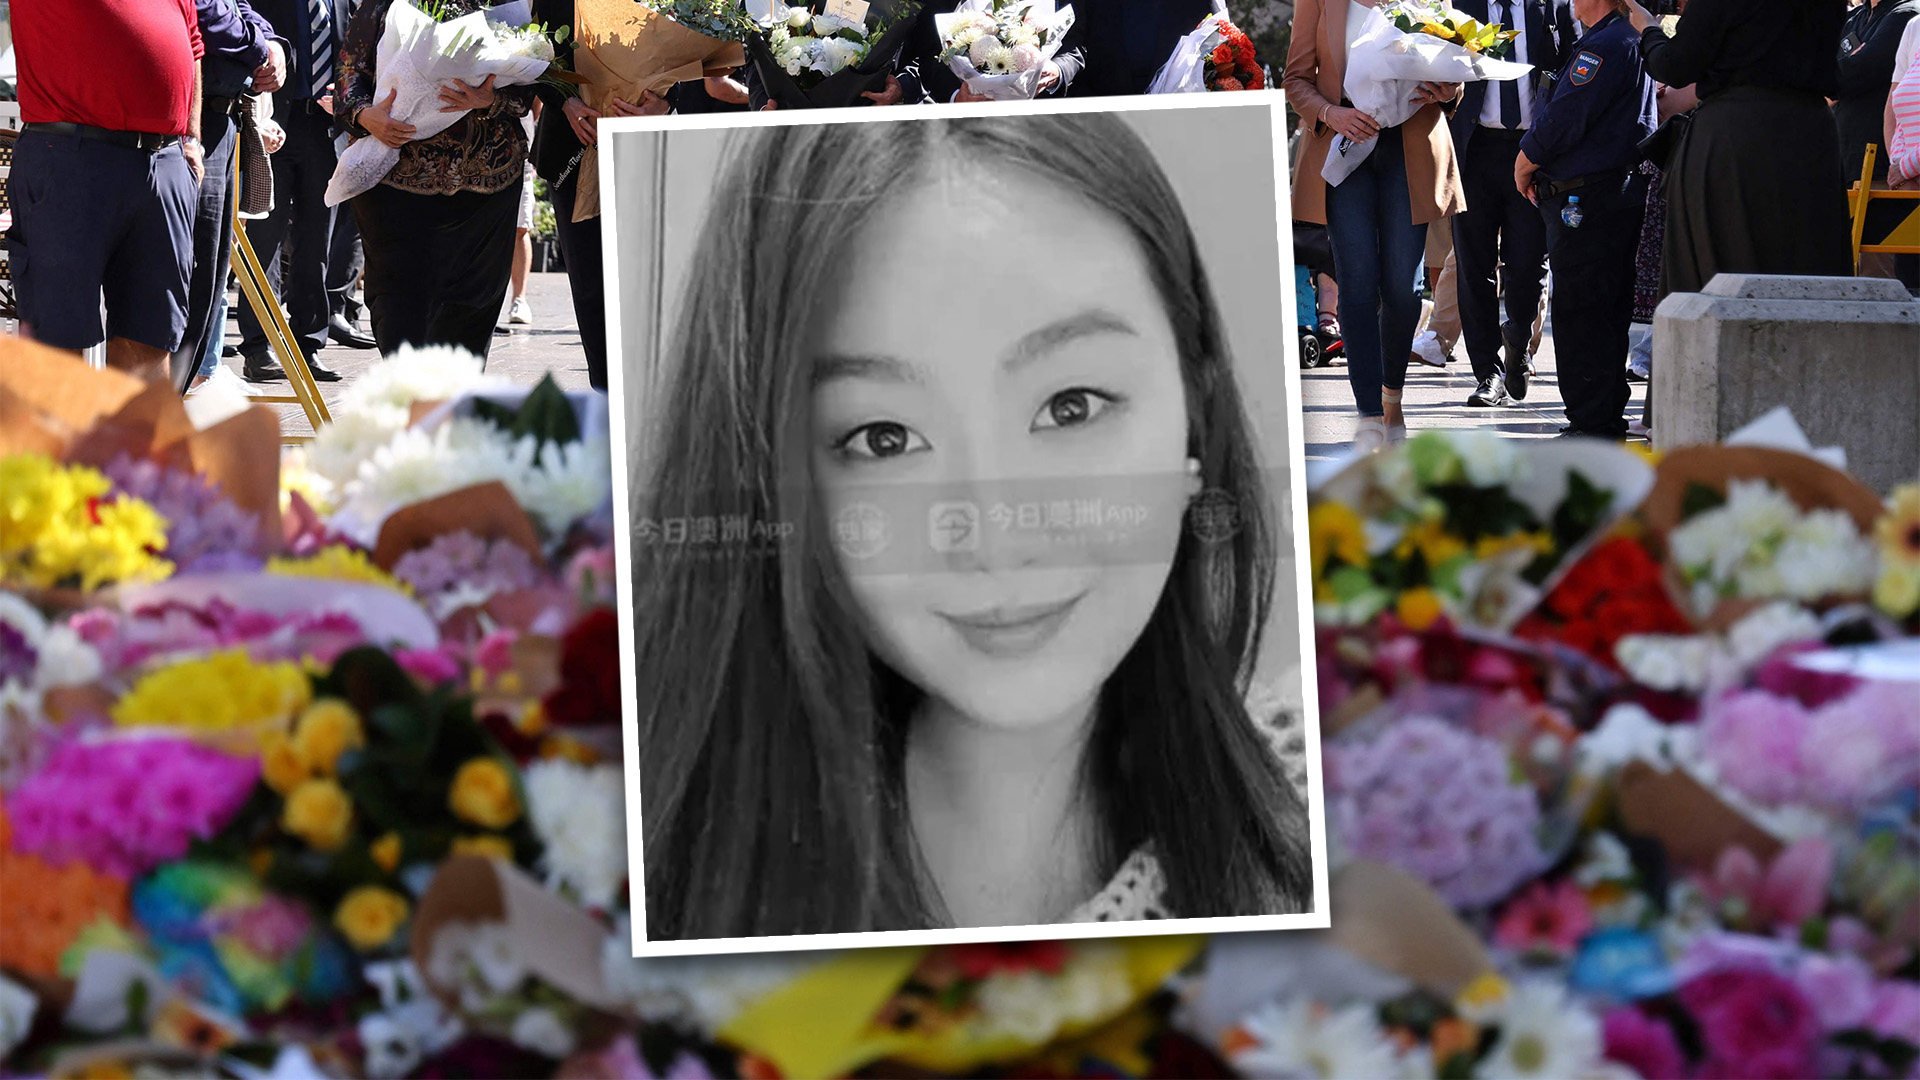 A 27-year-old university student from China has become the sixth victim of a deadly knife rampage that took place at a shopping centre in Australia on March 13. Photo: SCMP composite/AFP/Nine News/Sydney Today